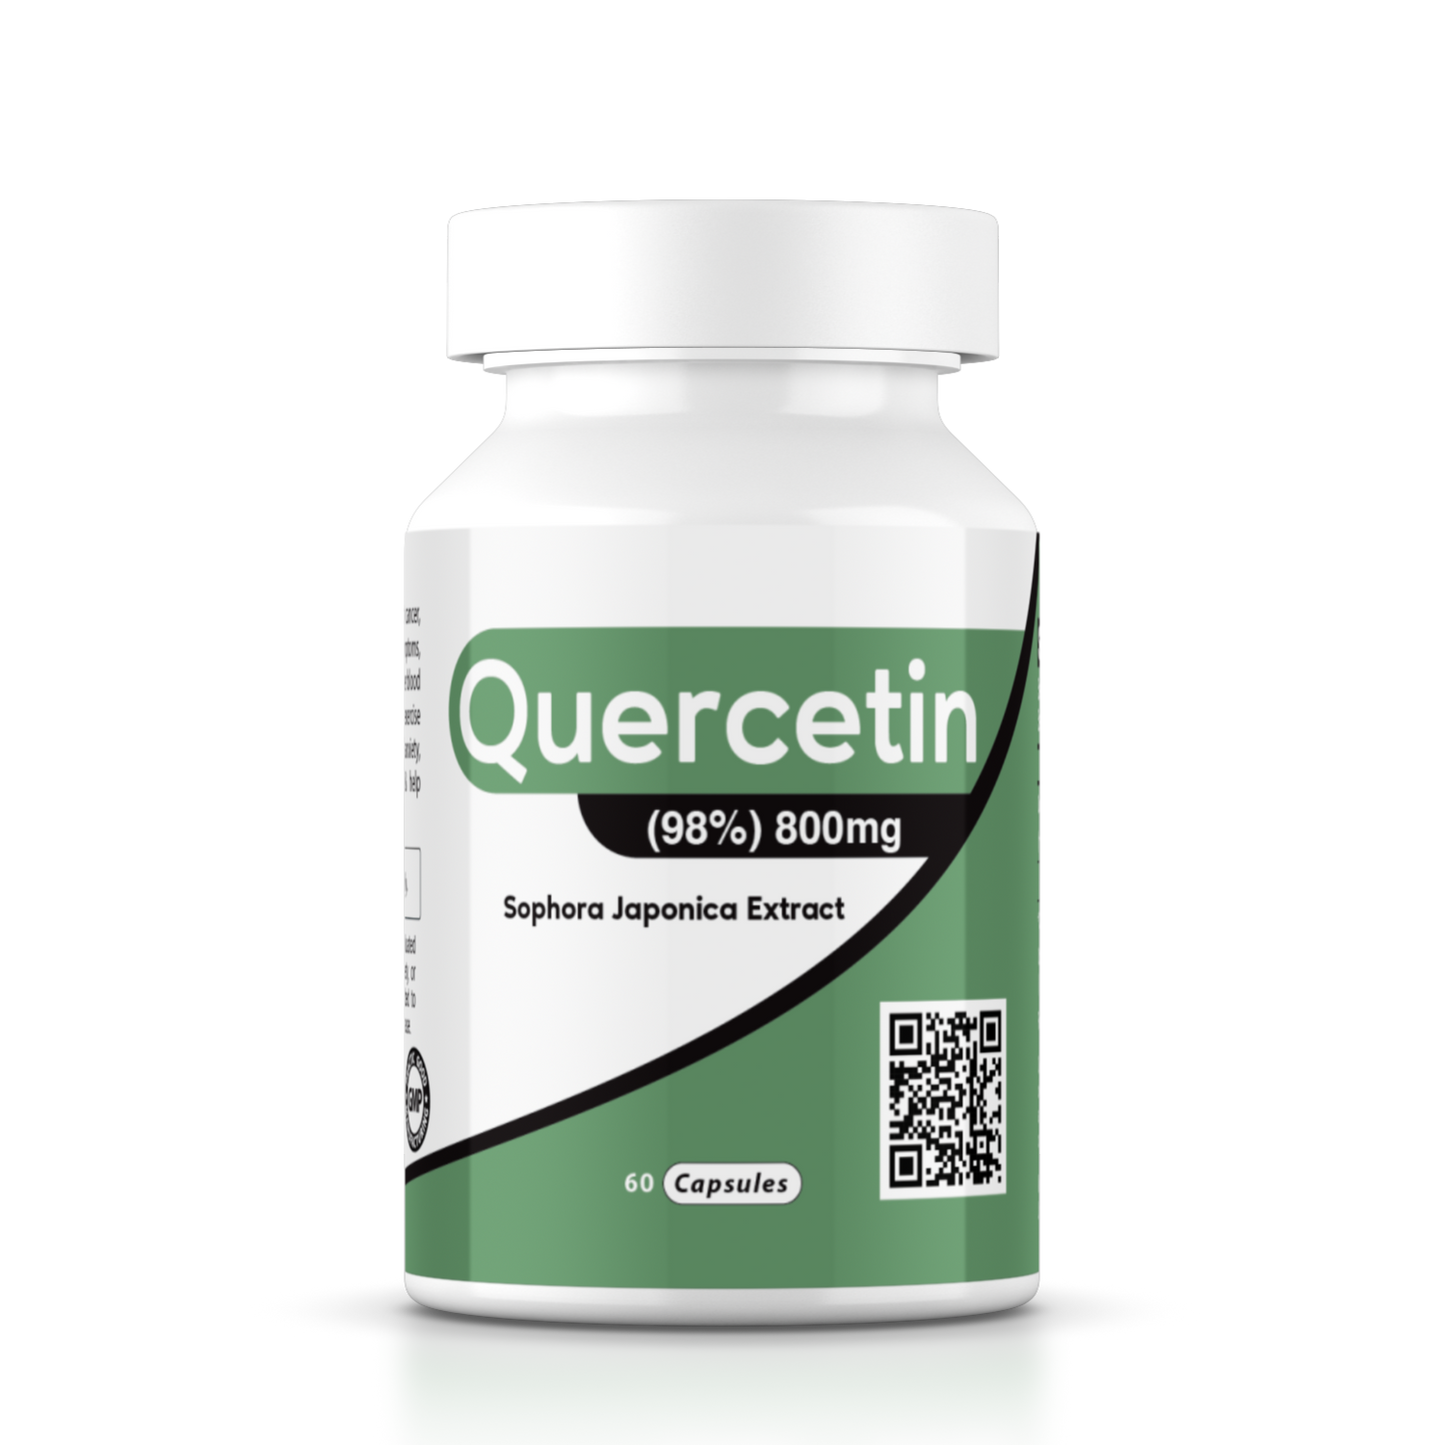 Quercetin (98%) 800mg - From Sophora Japonica Extract